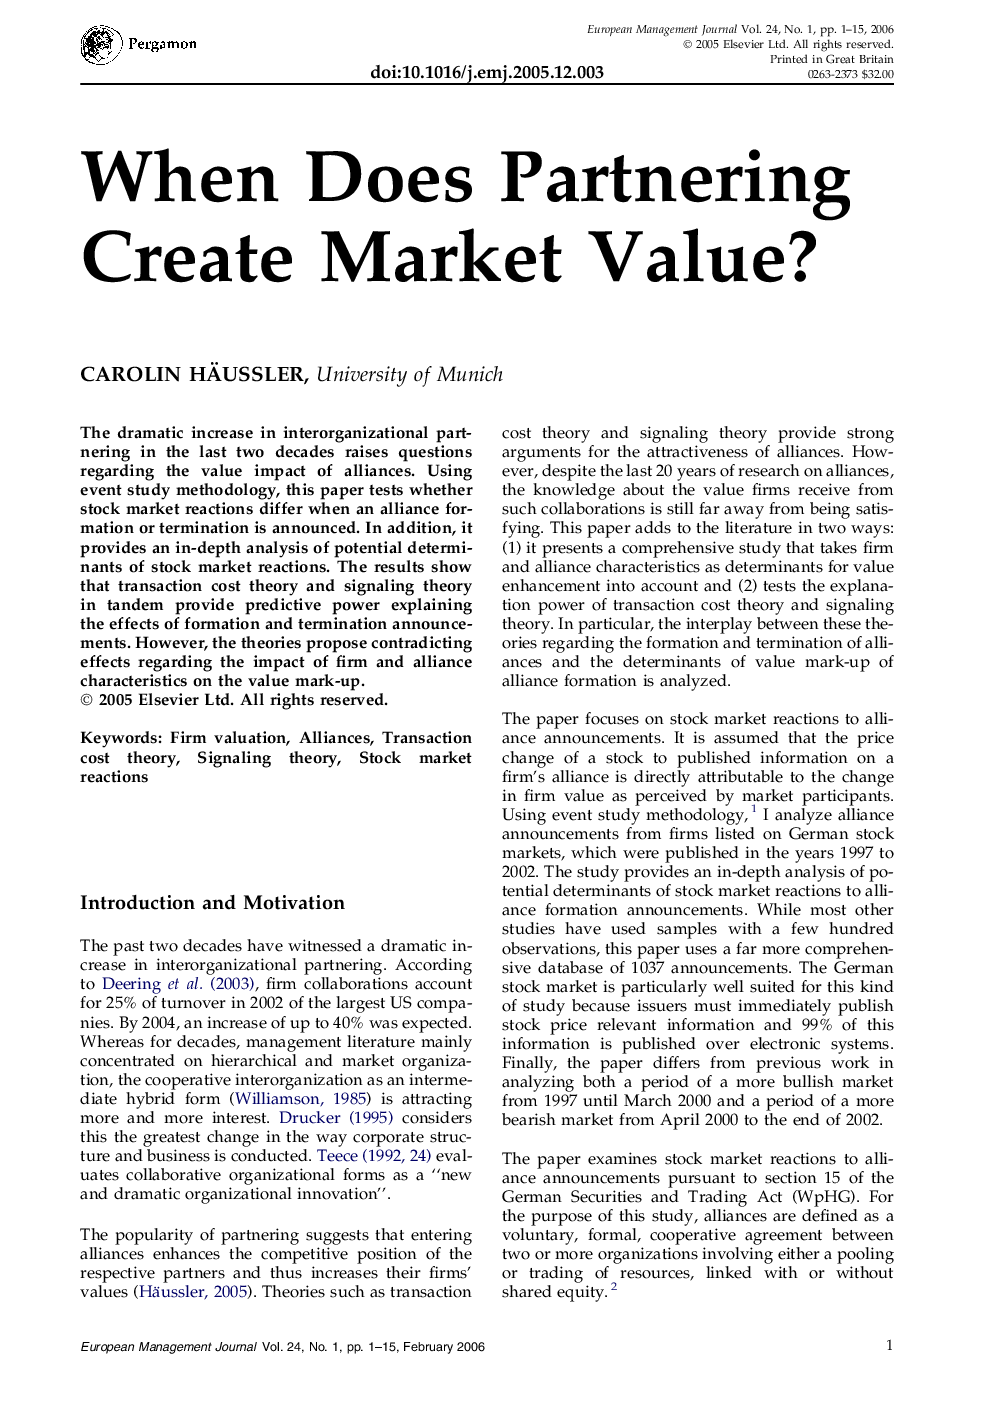 When Does Partnering Create Market Value?